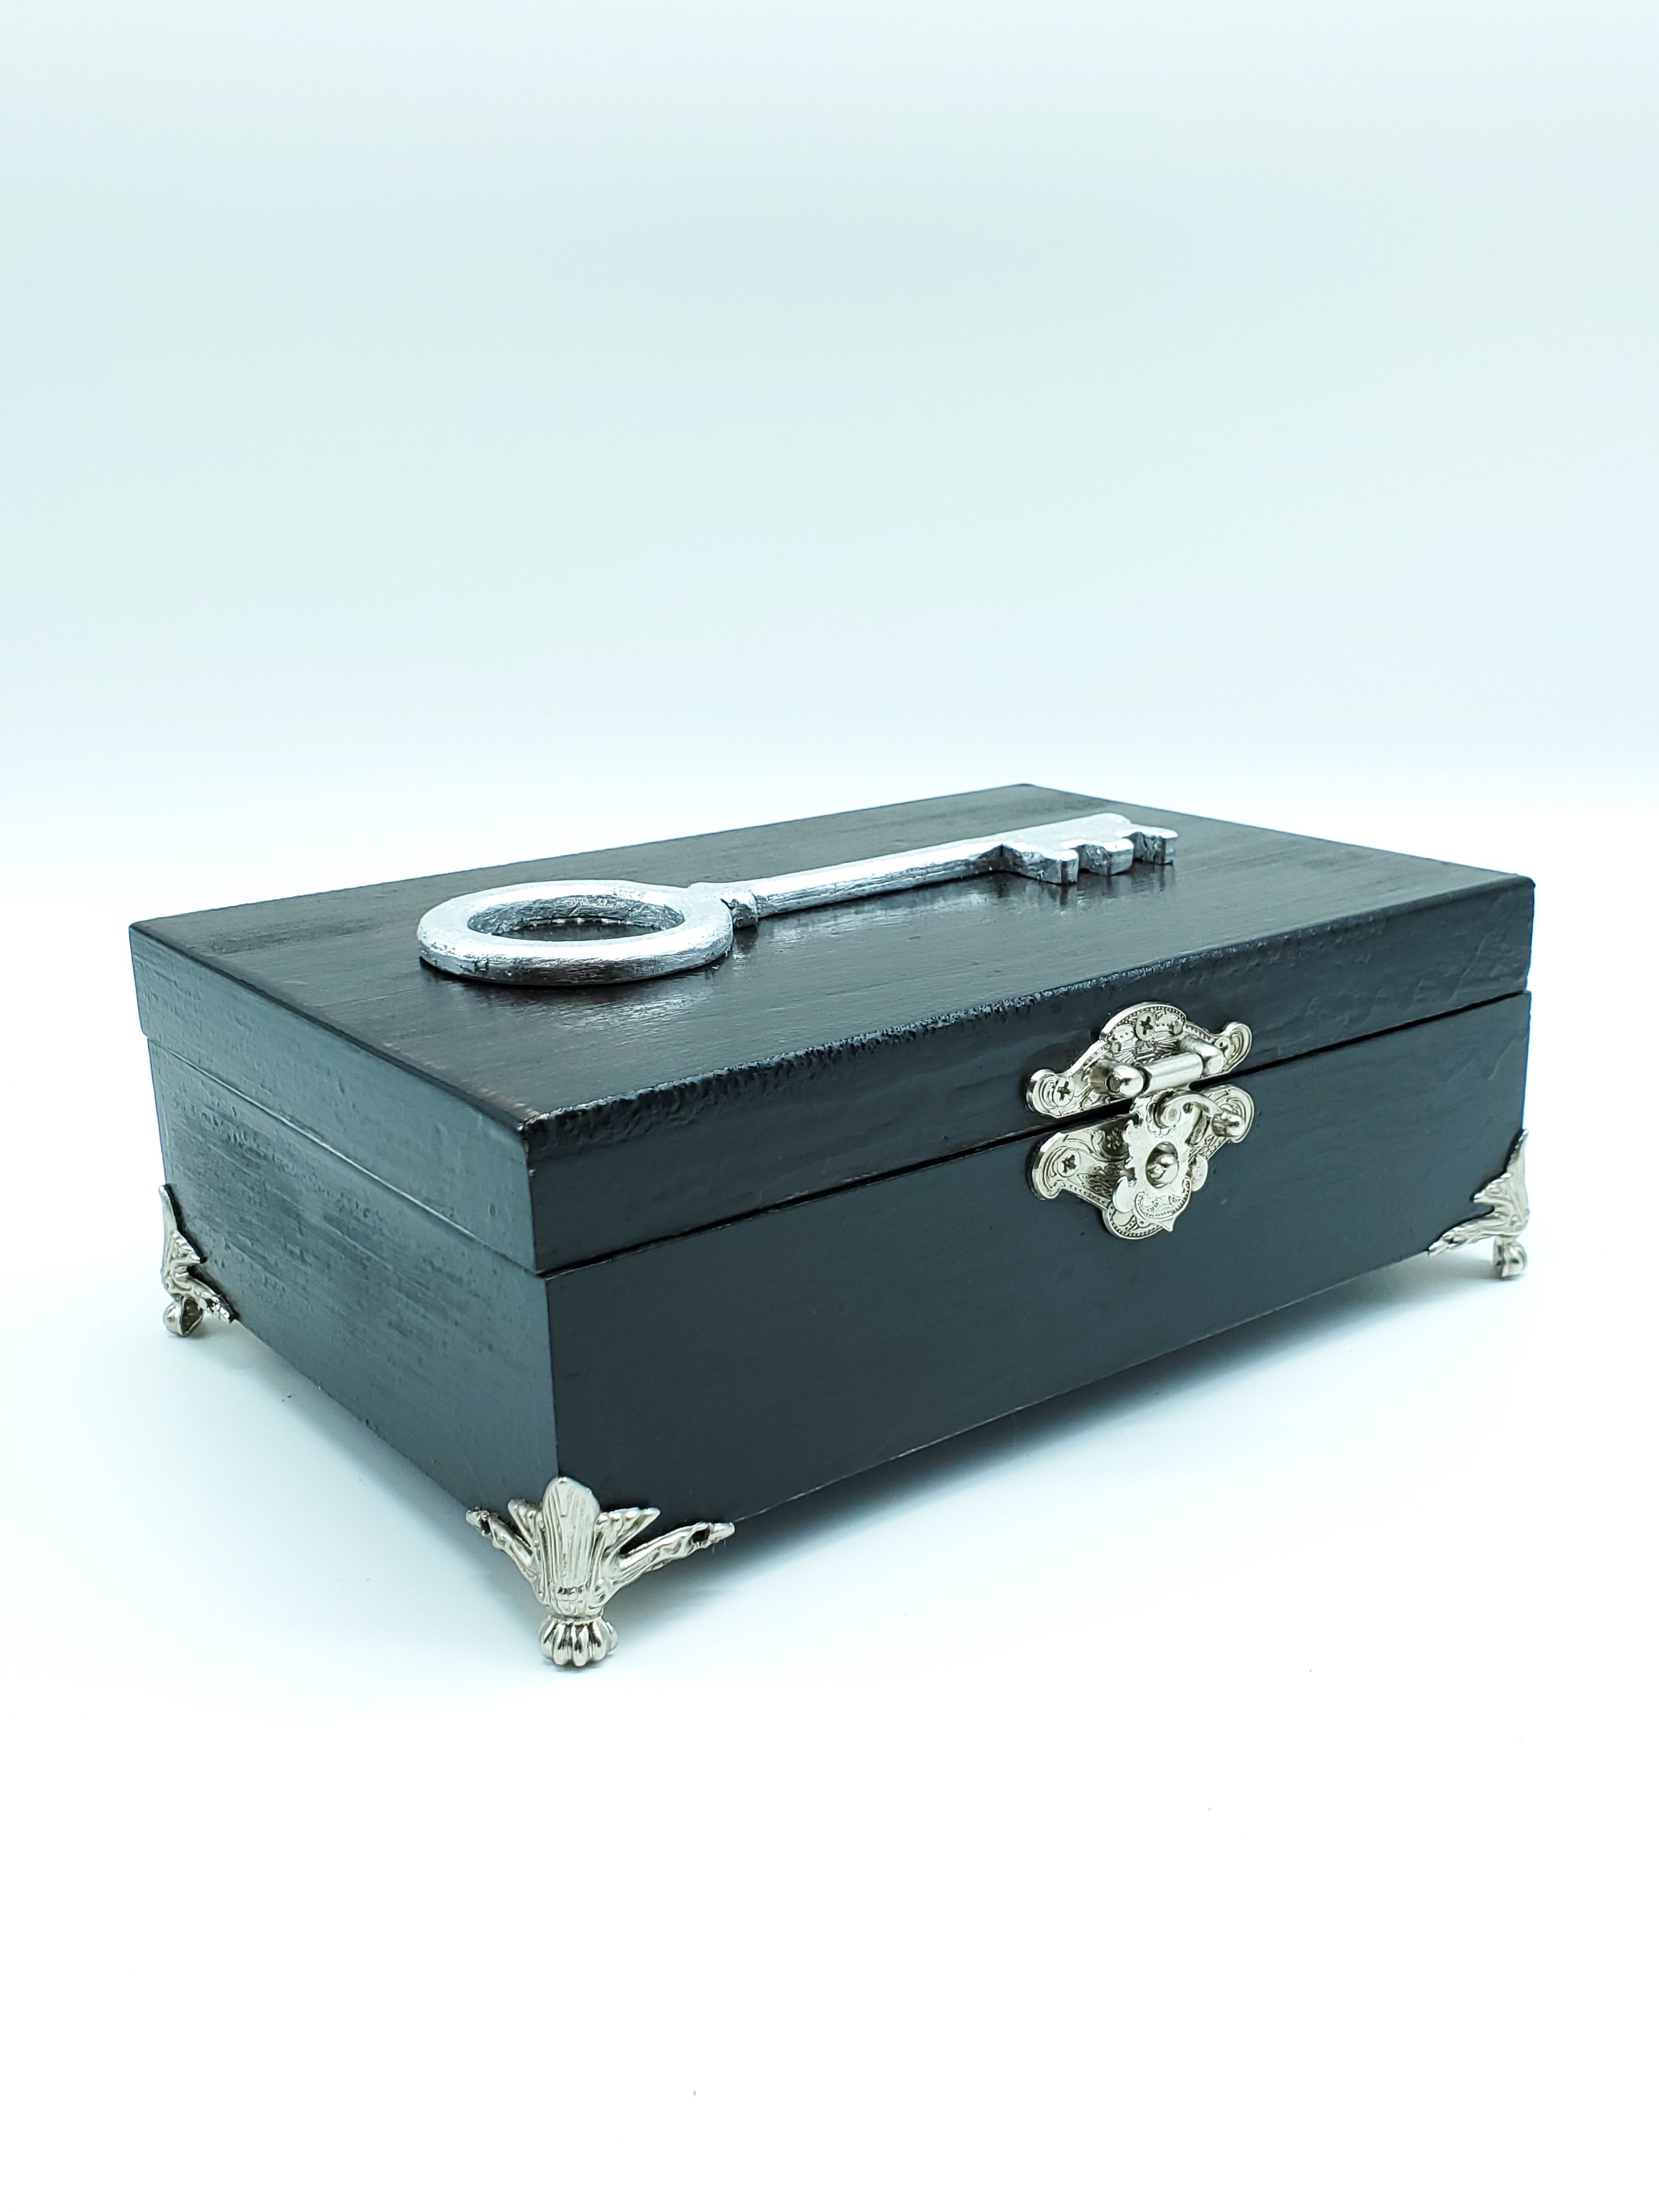 Hecate Keeping/Jewelry Box - The Caffeinated Raven